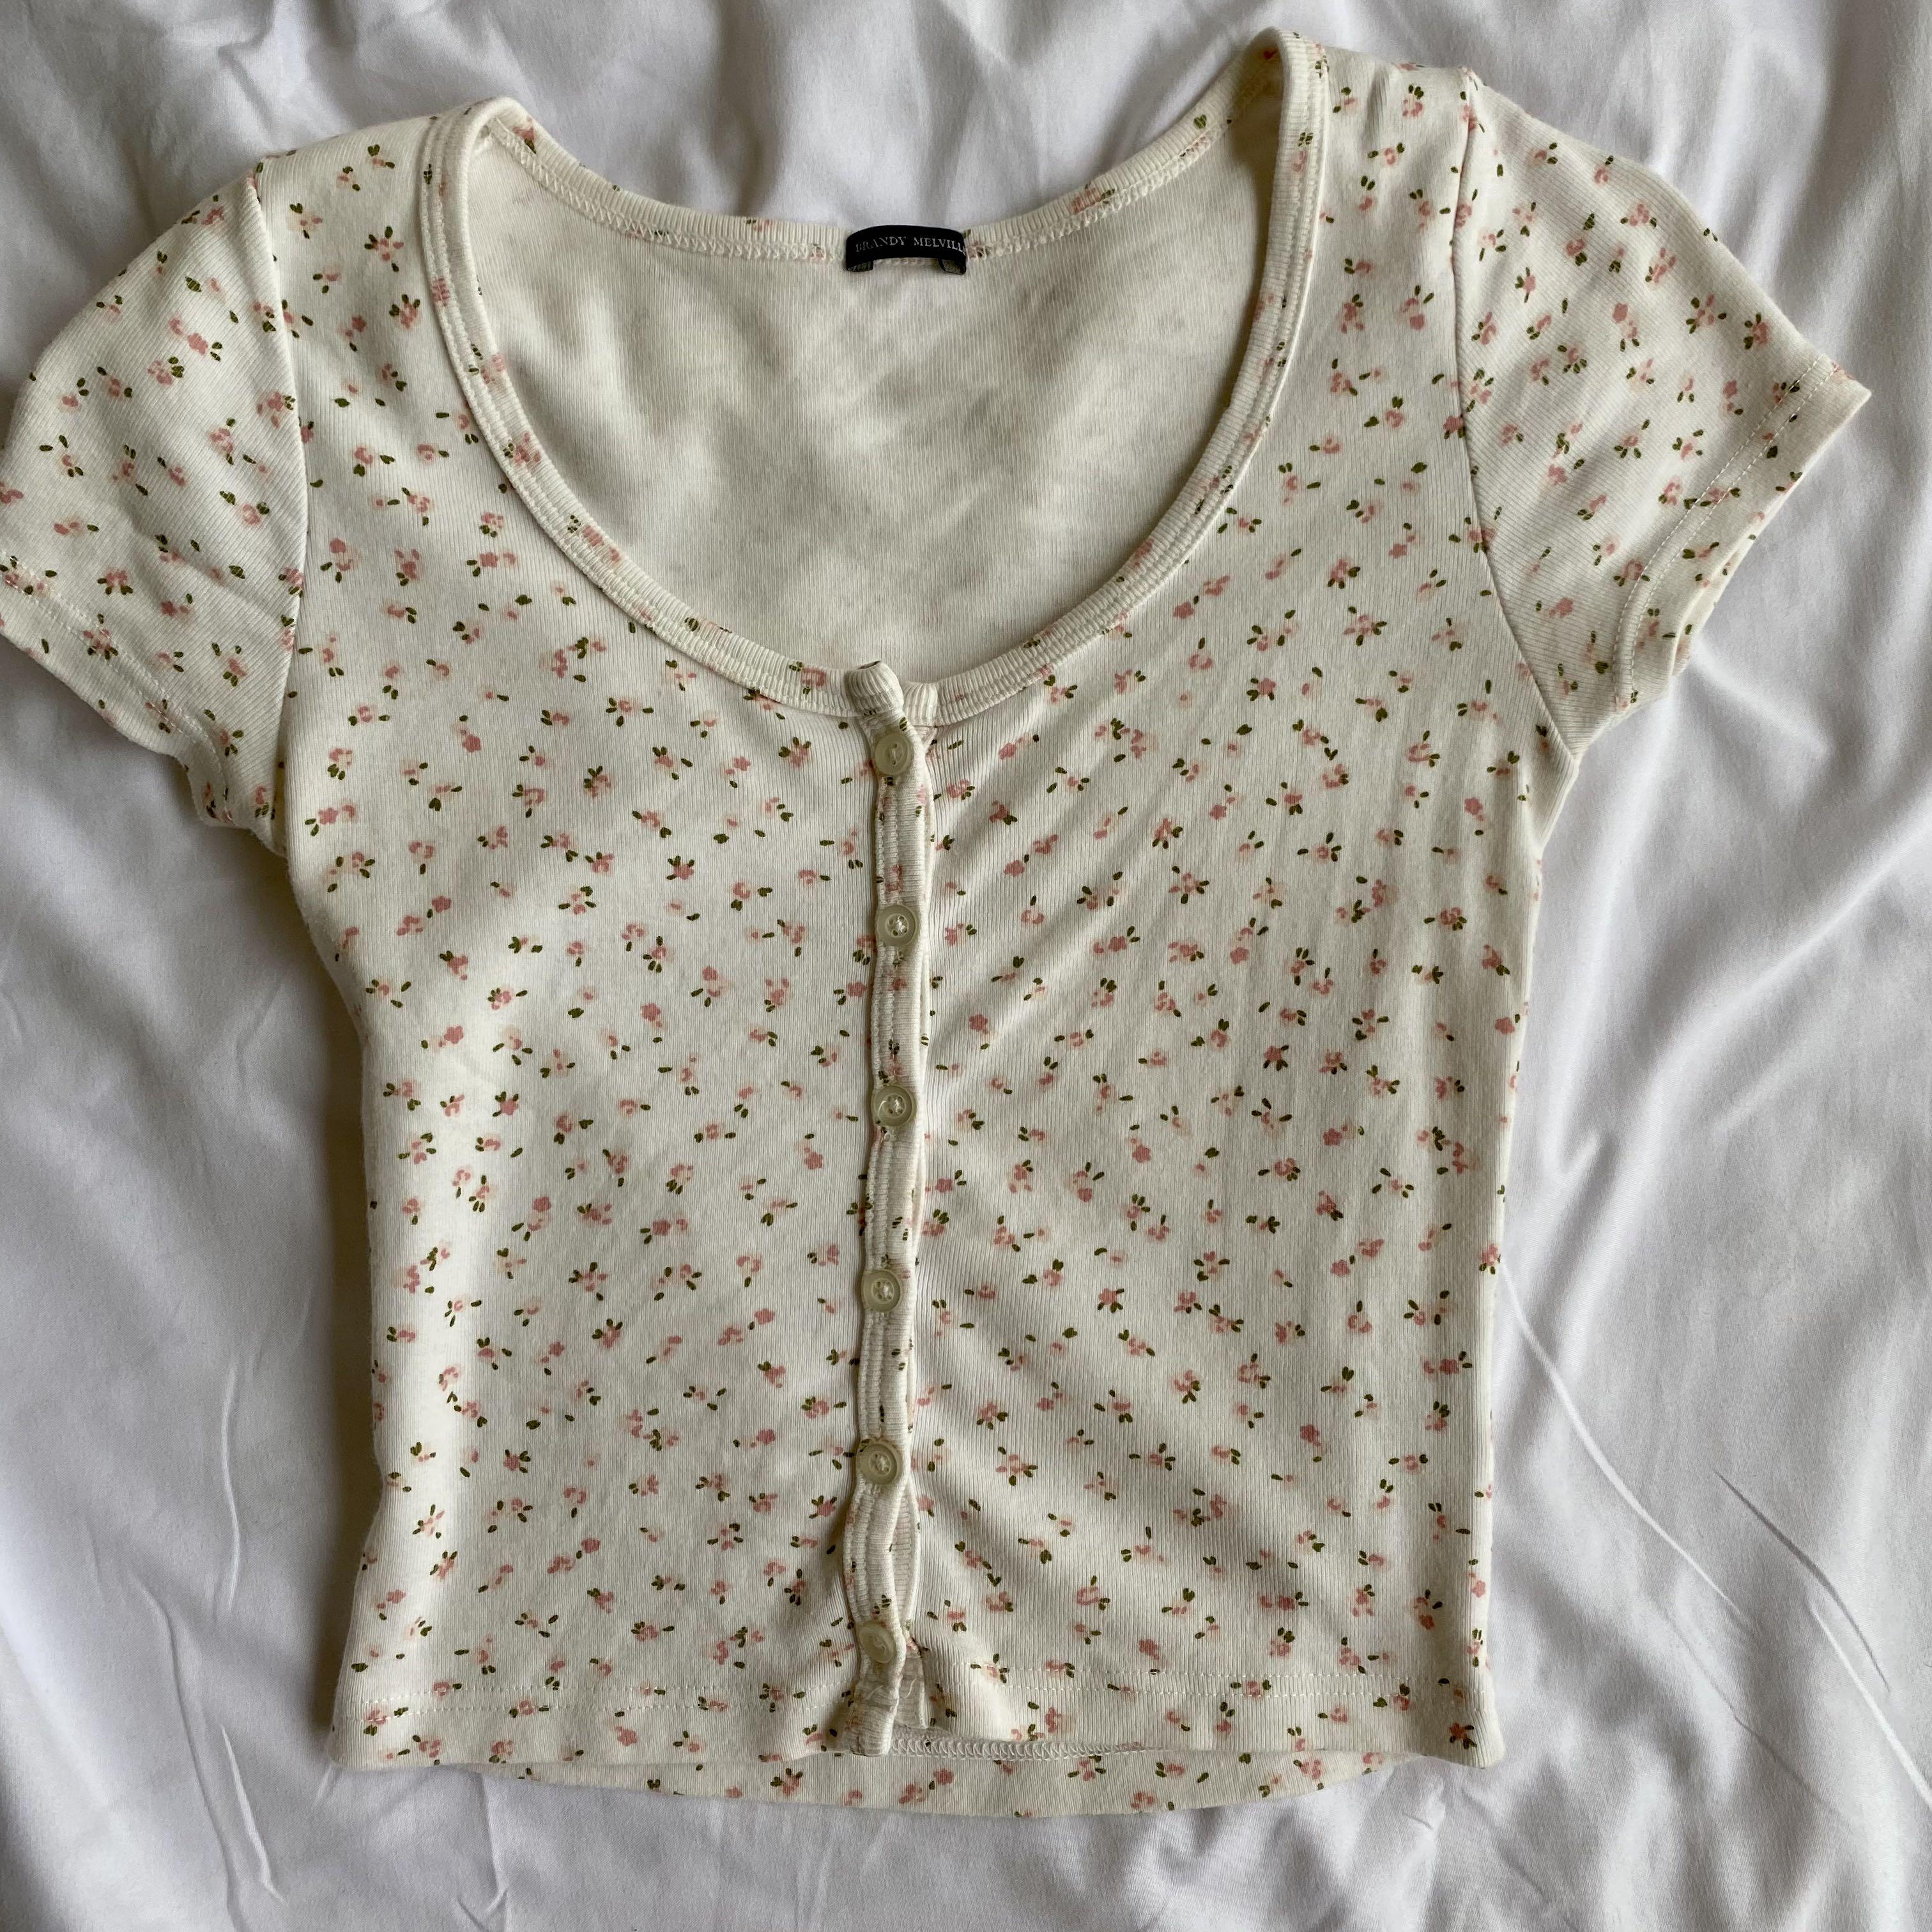 Brandy Melville Floral Zelly Top Women S Fashion Tops Blouses On Carousell